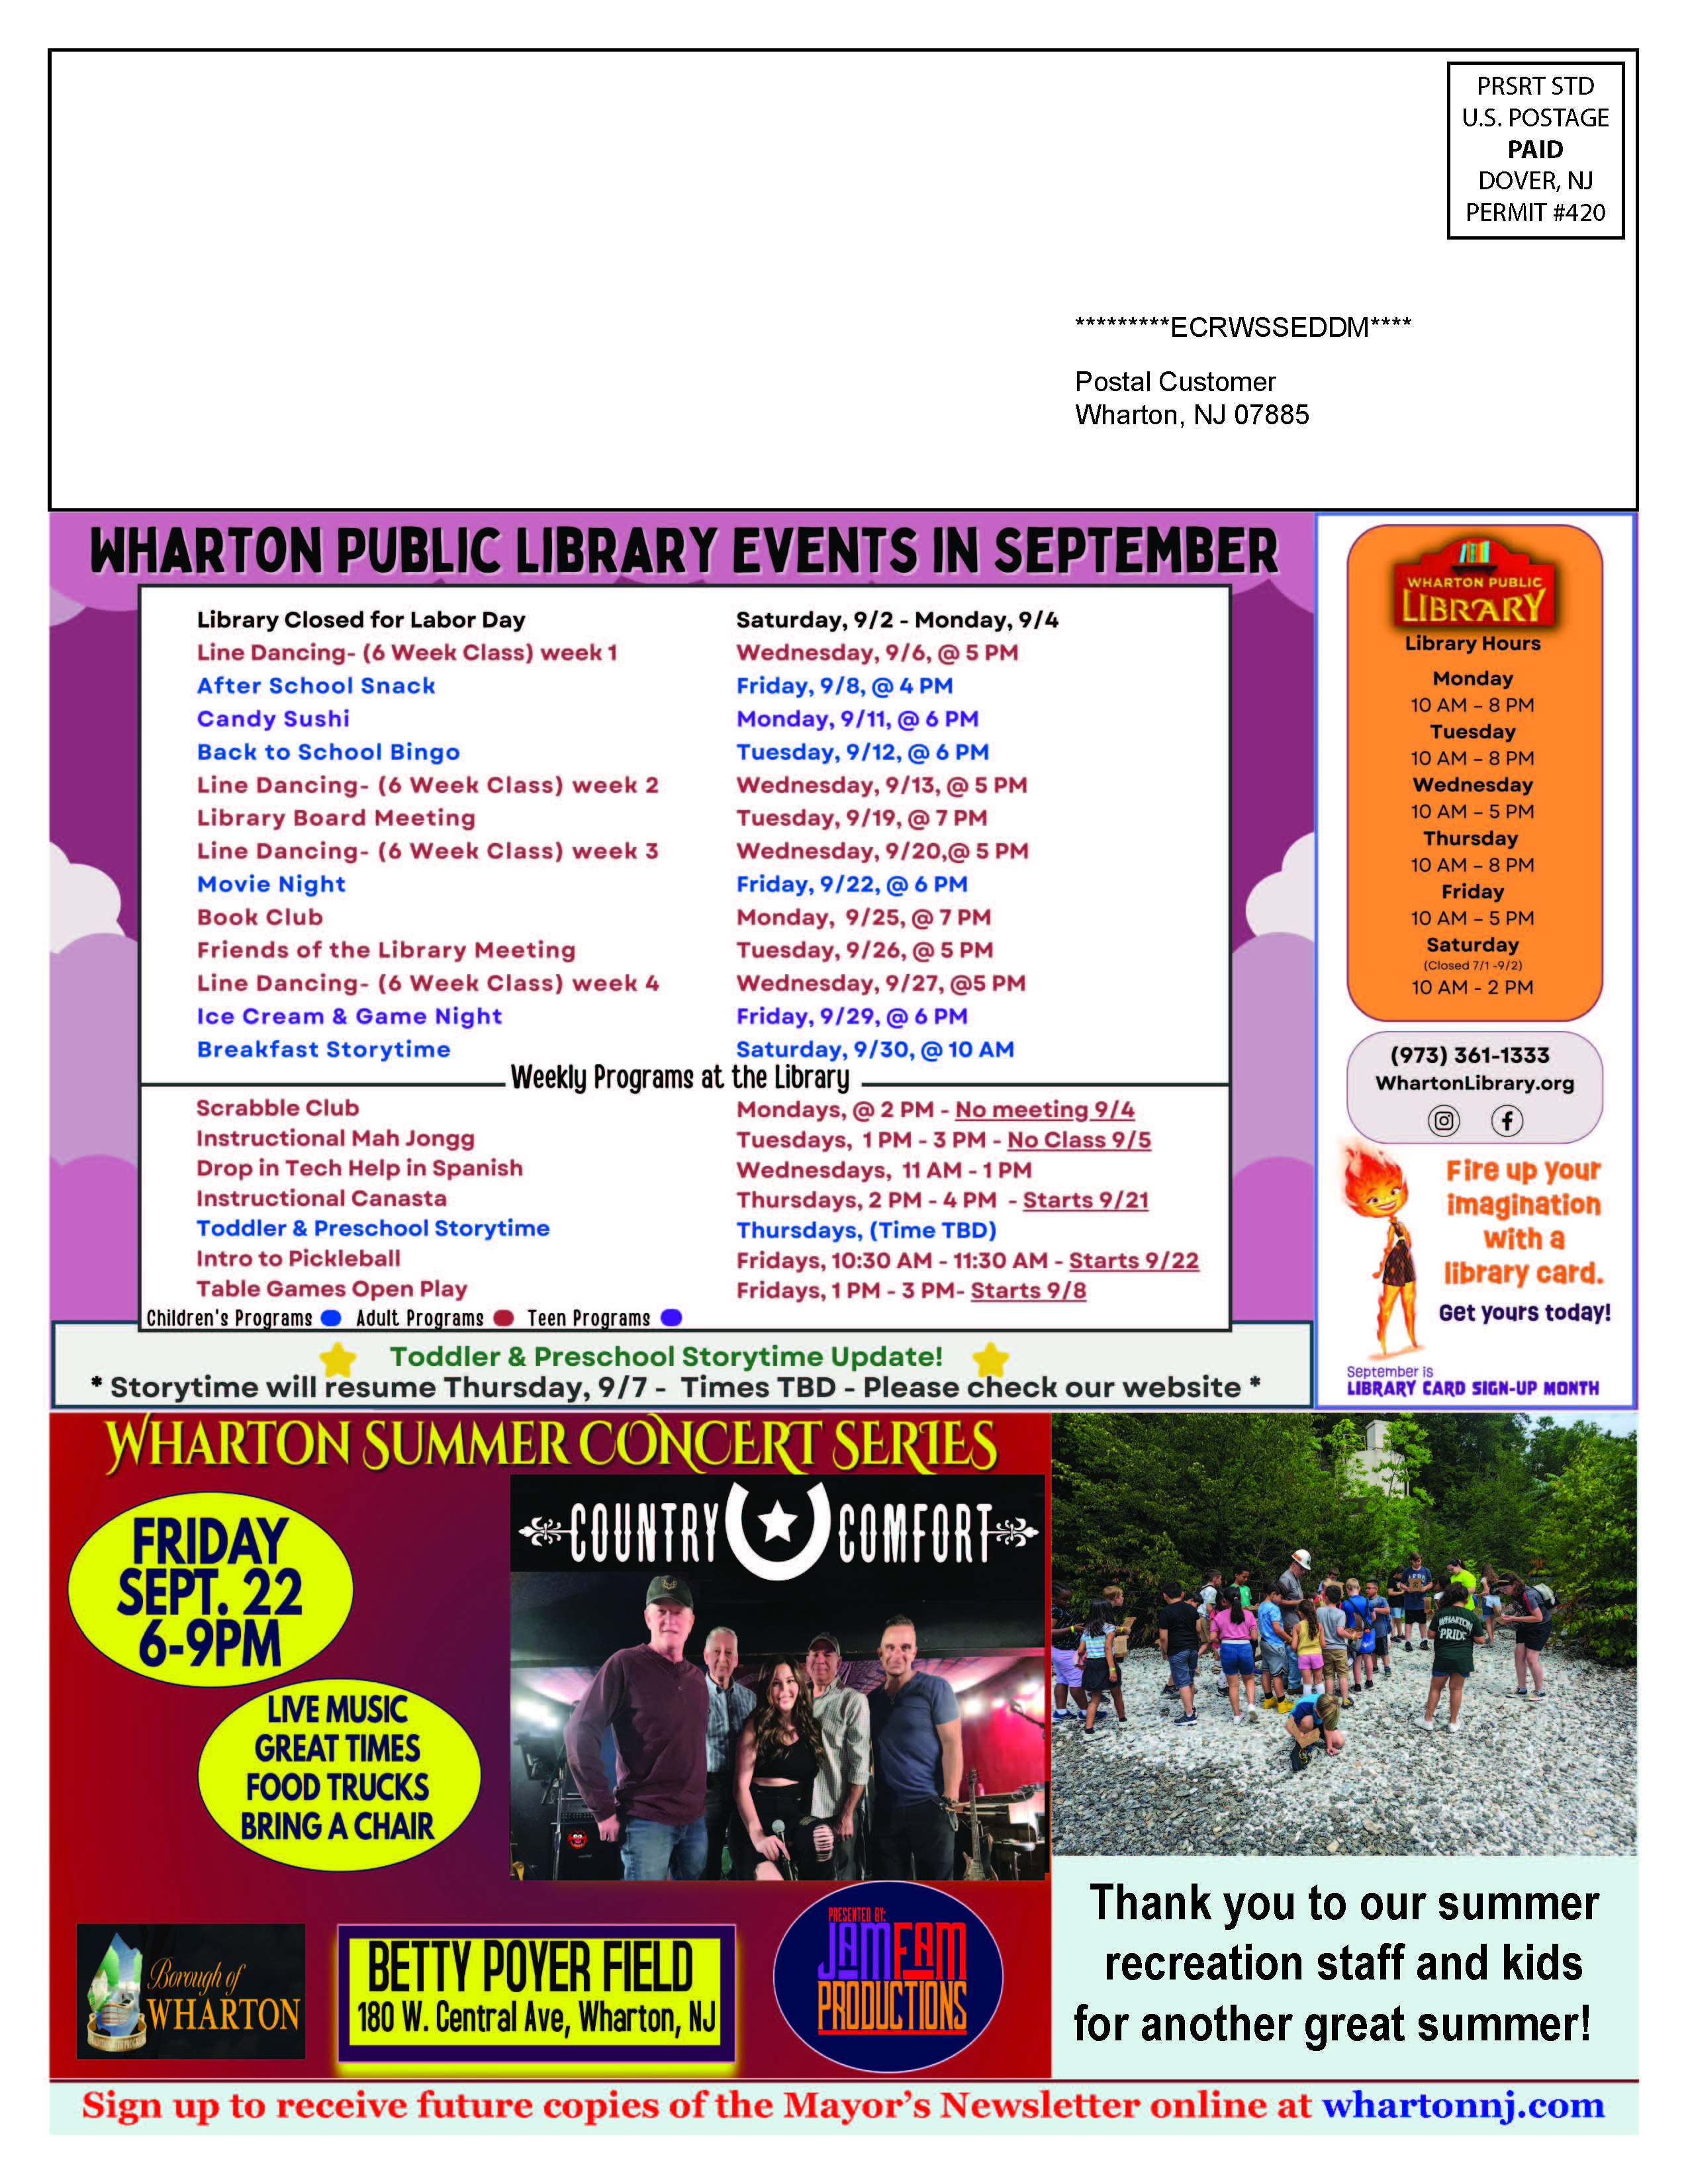 49164 September WhartonNewsletter PROOF Page 2